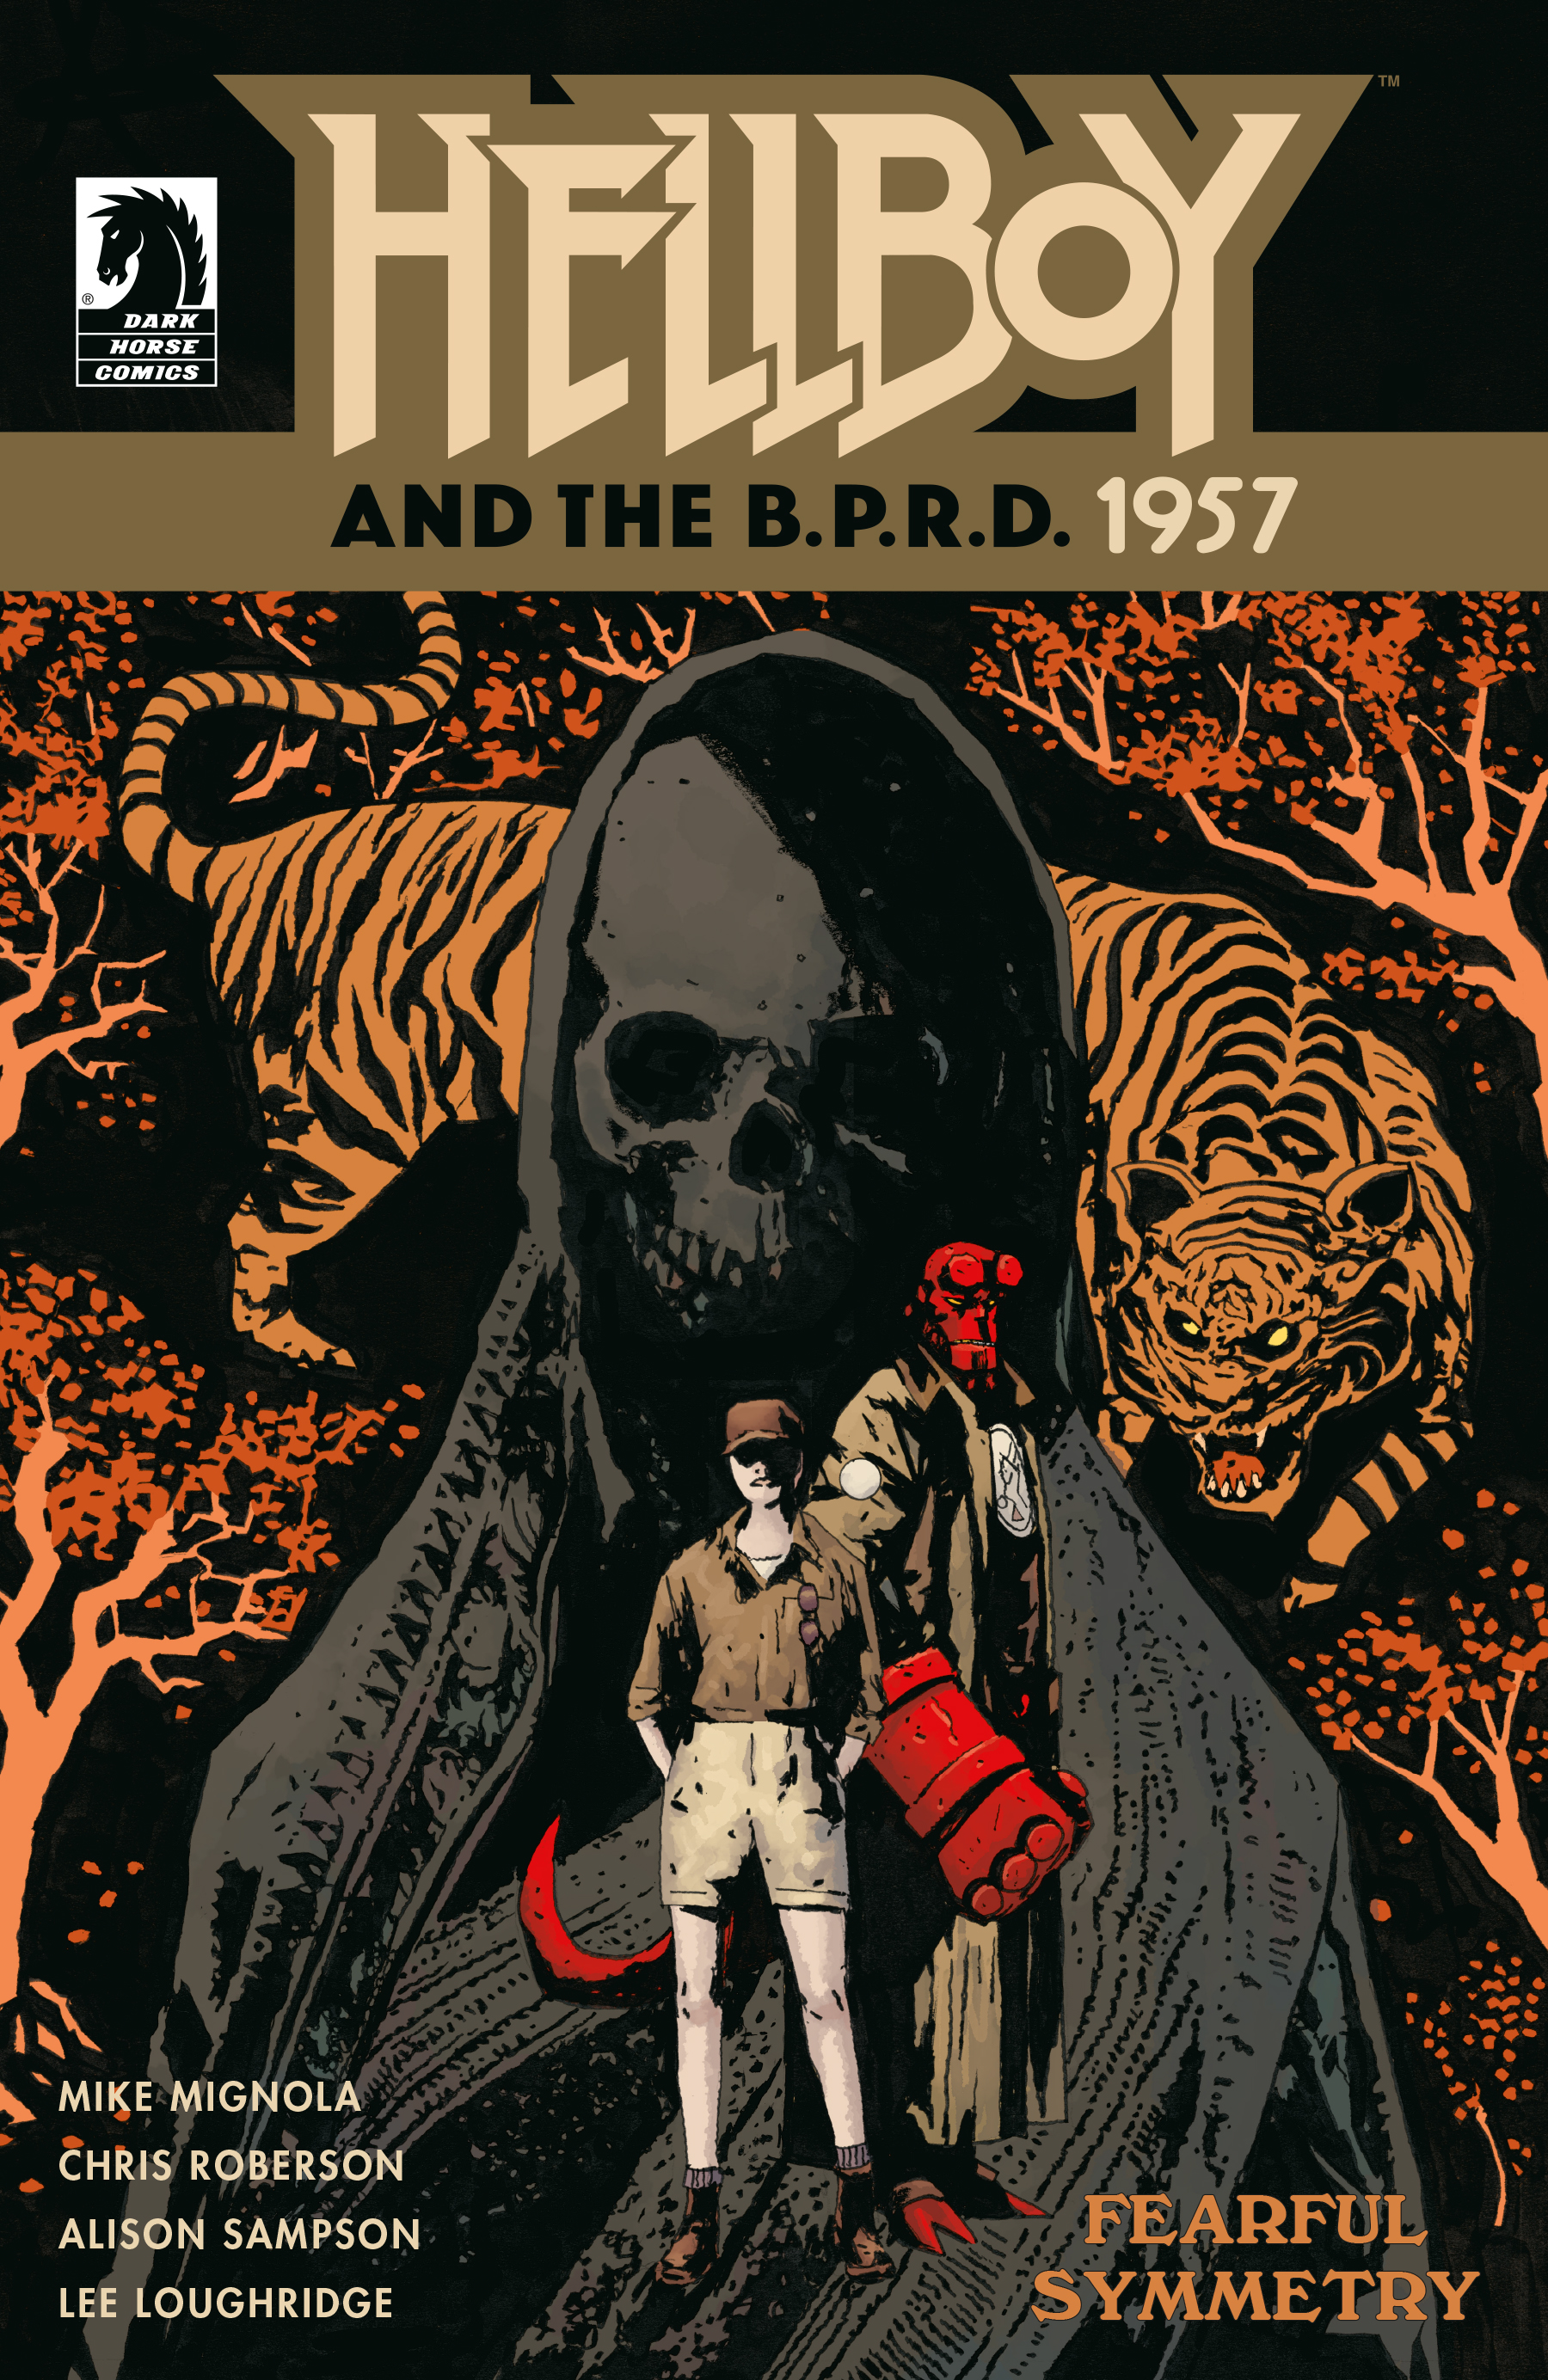 Read online Hellboy and the B.P.R.D.: 1957 - Fearful Symmetry comic -  Issue # Full - 1